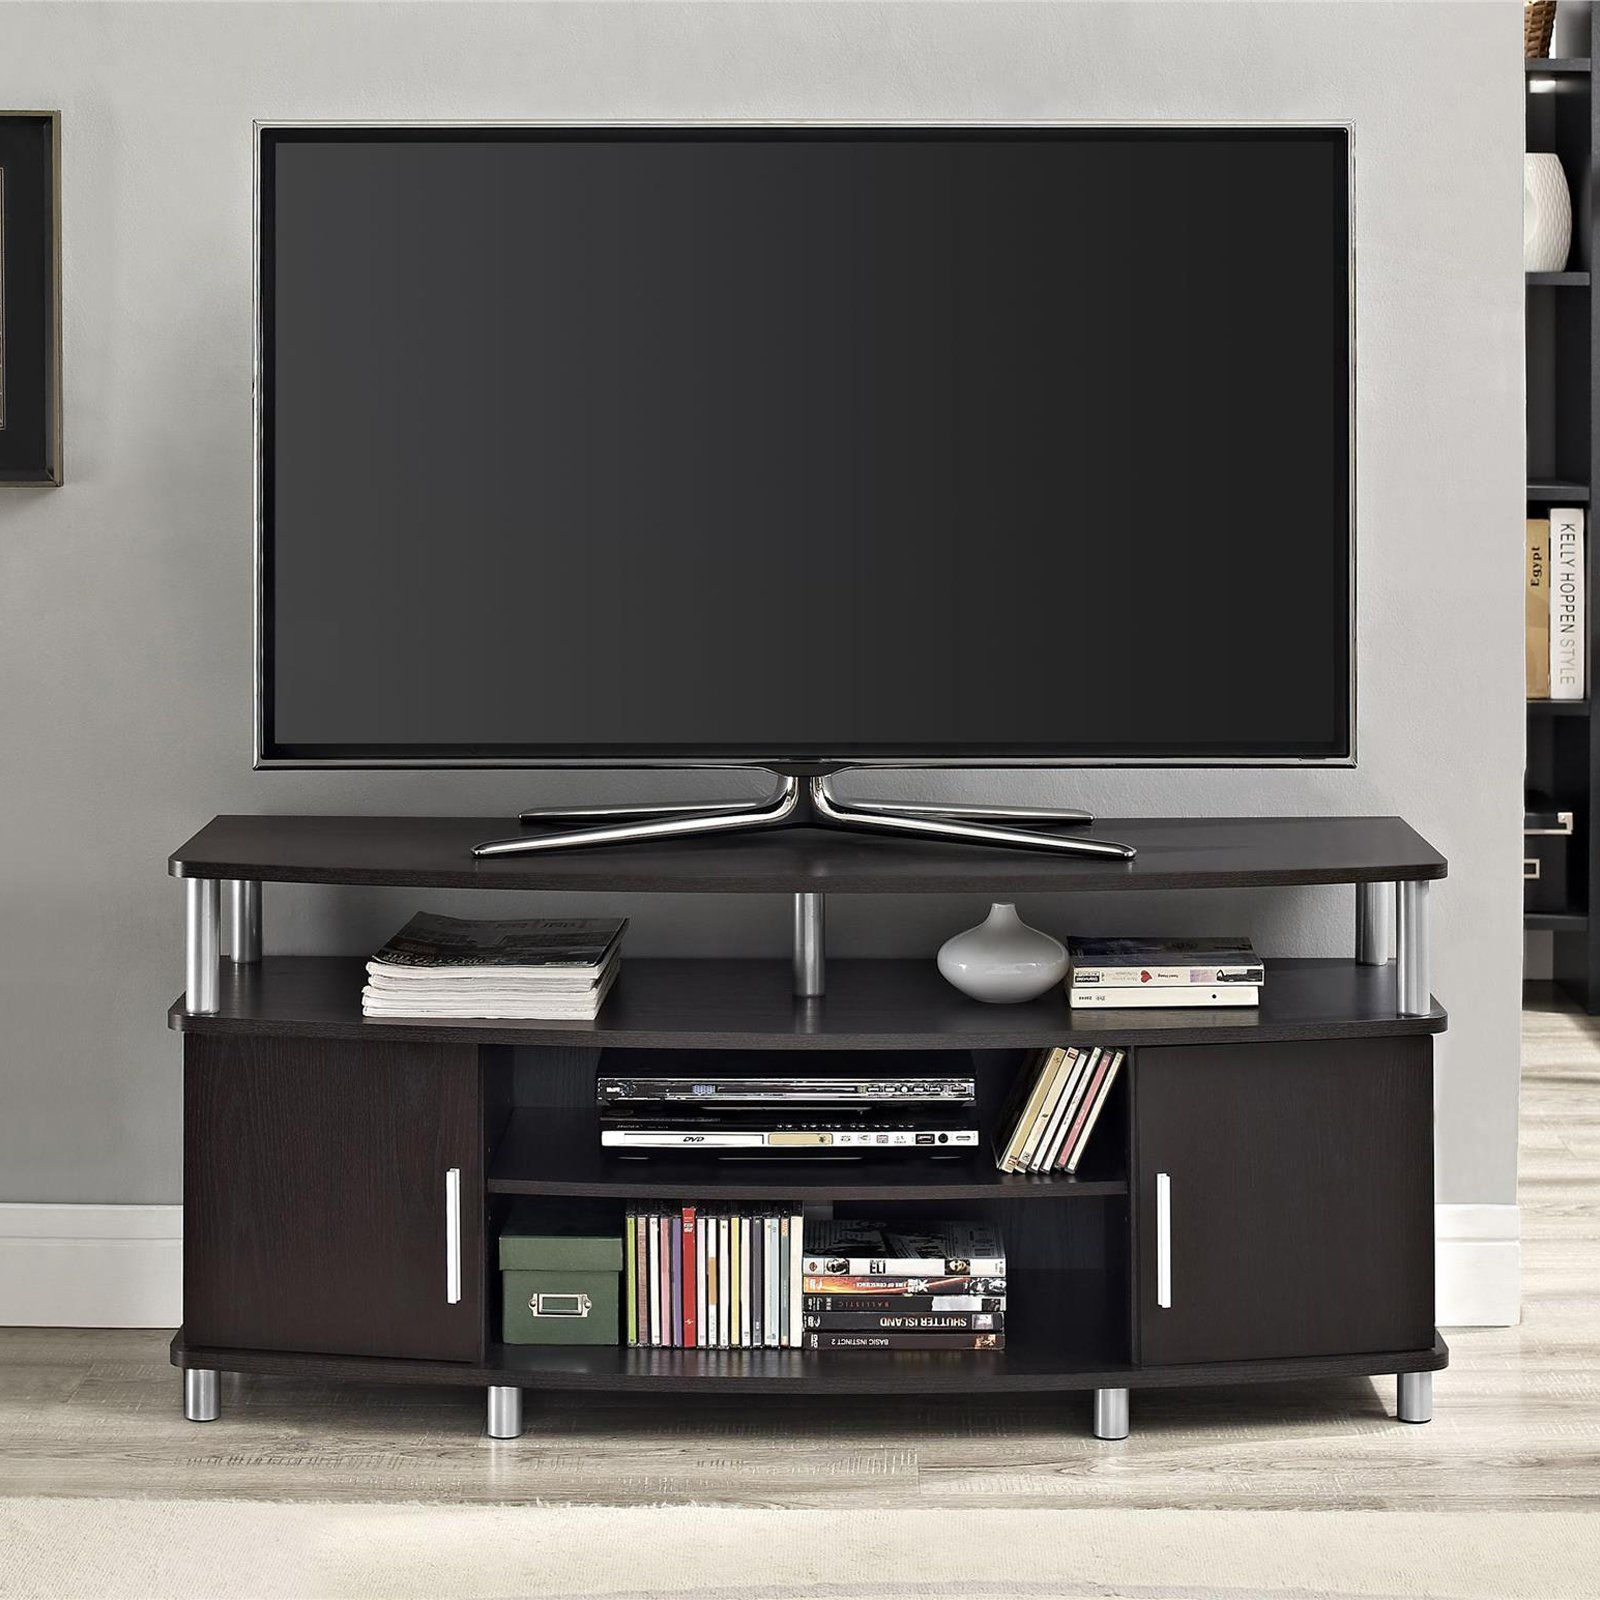 Smart Hd Tv Stand 50 Inch Digital Low Profile Small Throughout Small Tv Stands (Photo 2 of 15)